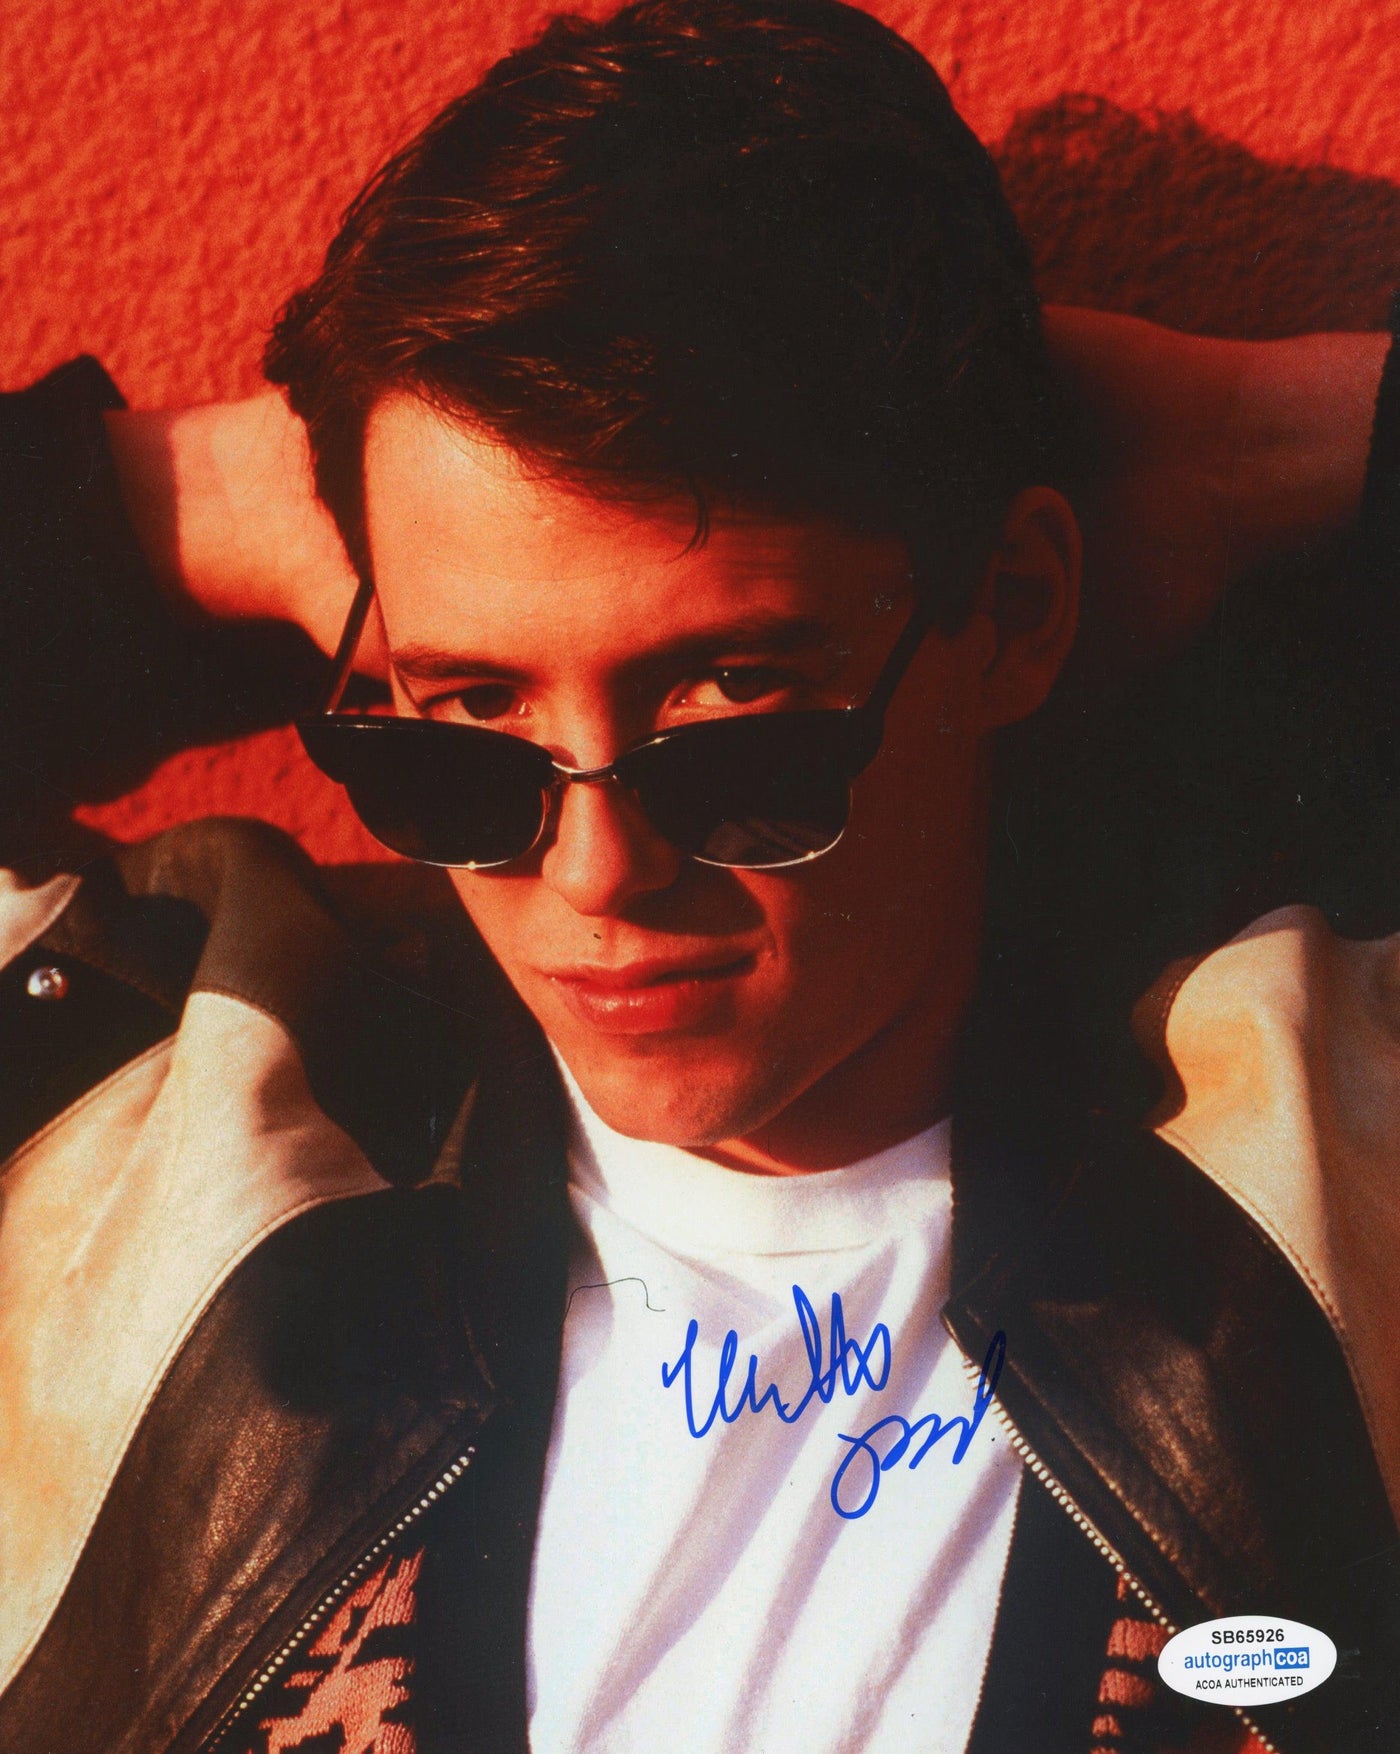 Matthew Broderick Signed 8x10 Photo Ferris Bueller's Day Off Autographed ACOA #3